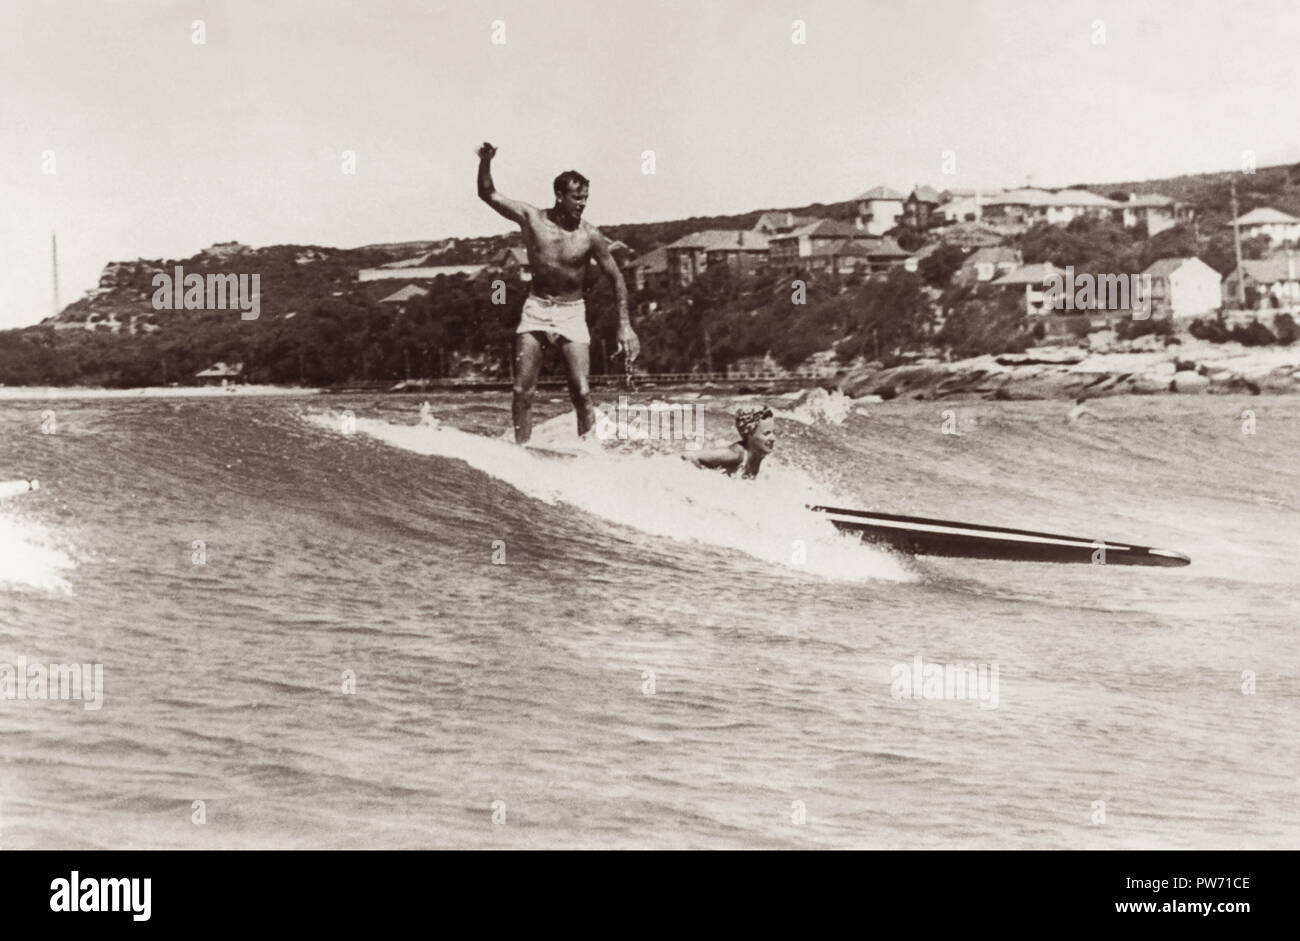 Man and woman surfing tandem on a longboard in 1945 at Manly Beach, Sydney, Australia. (Photo by Ray Leighton) Stock Photo